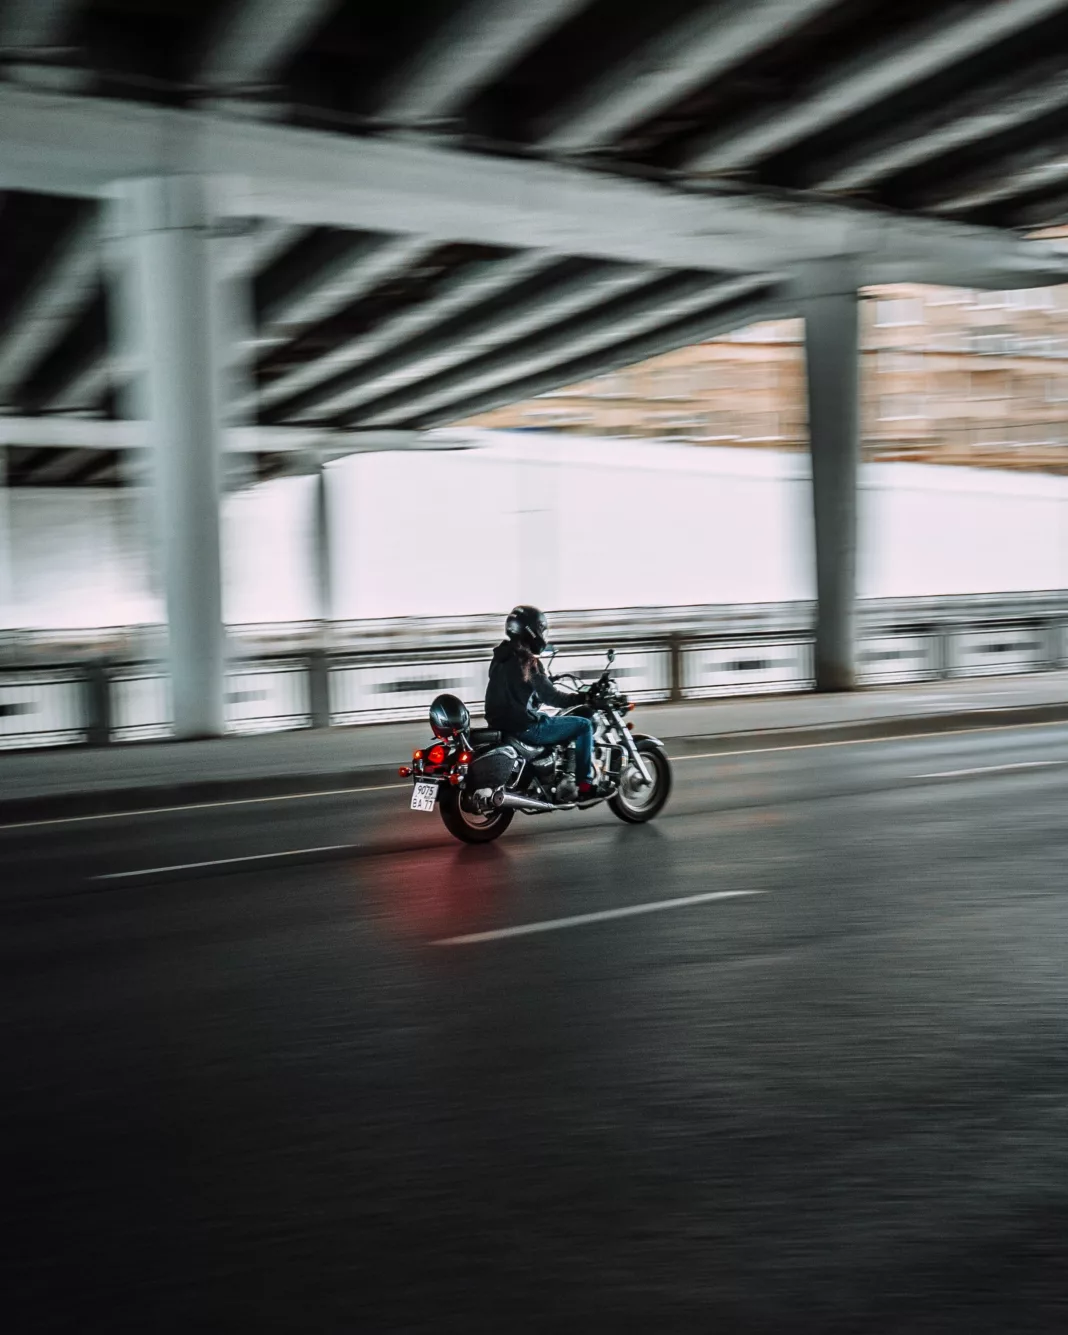 Motorcyclist on a road